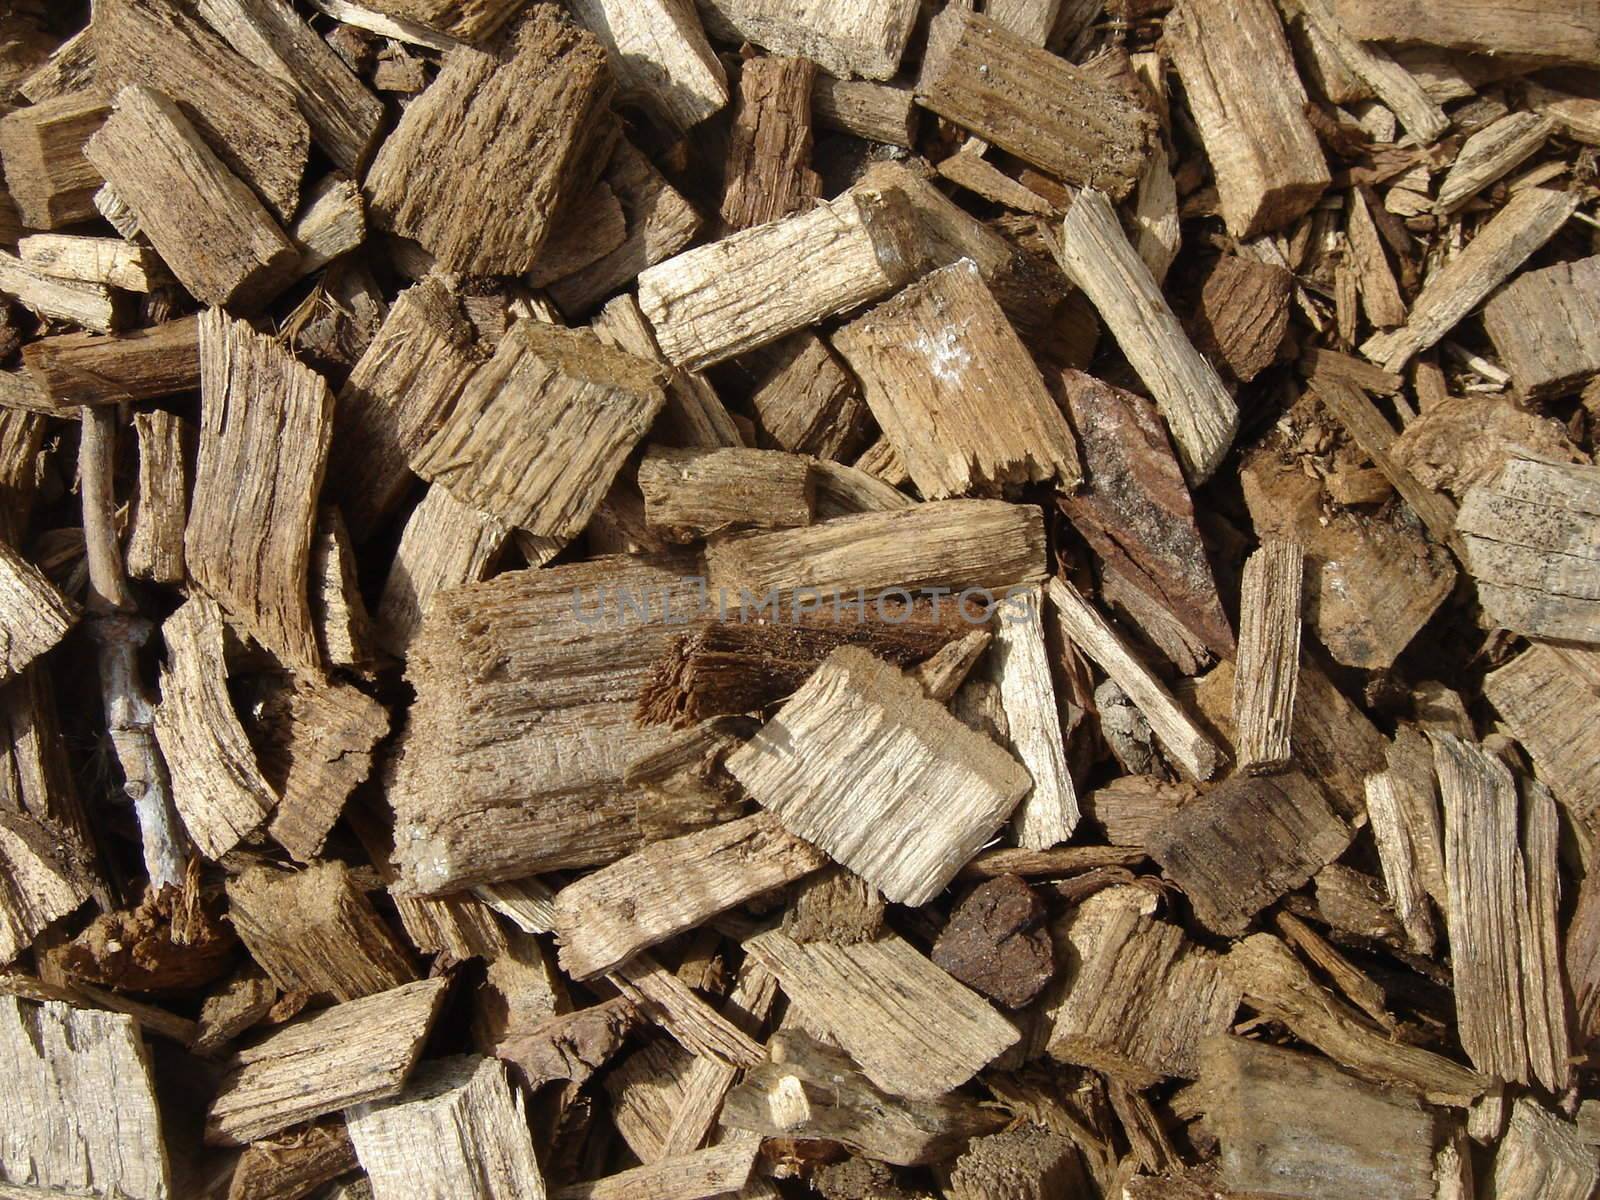 Chips of brown wood